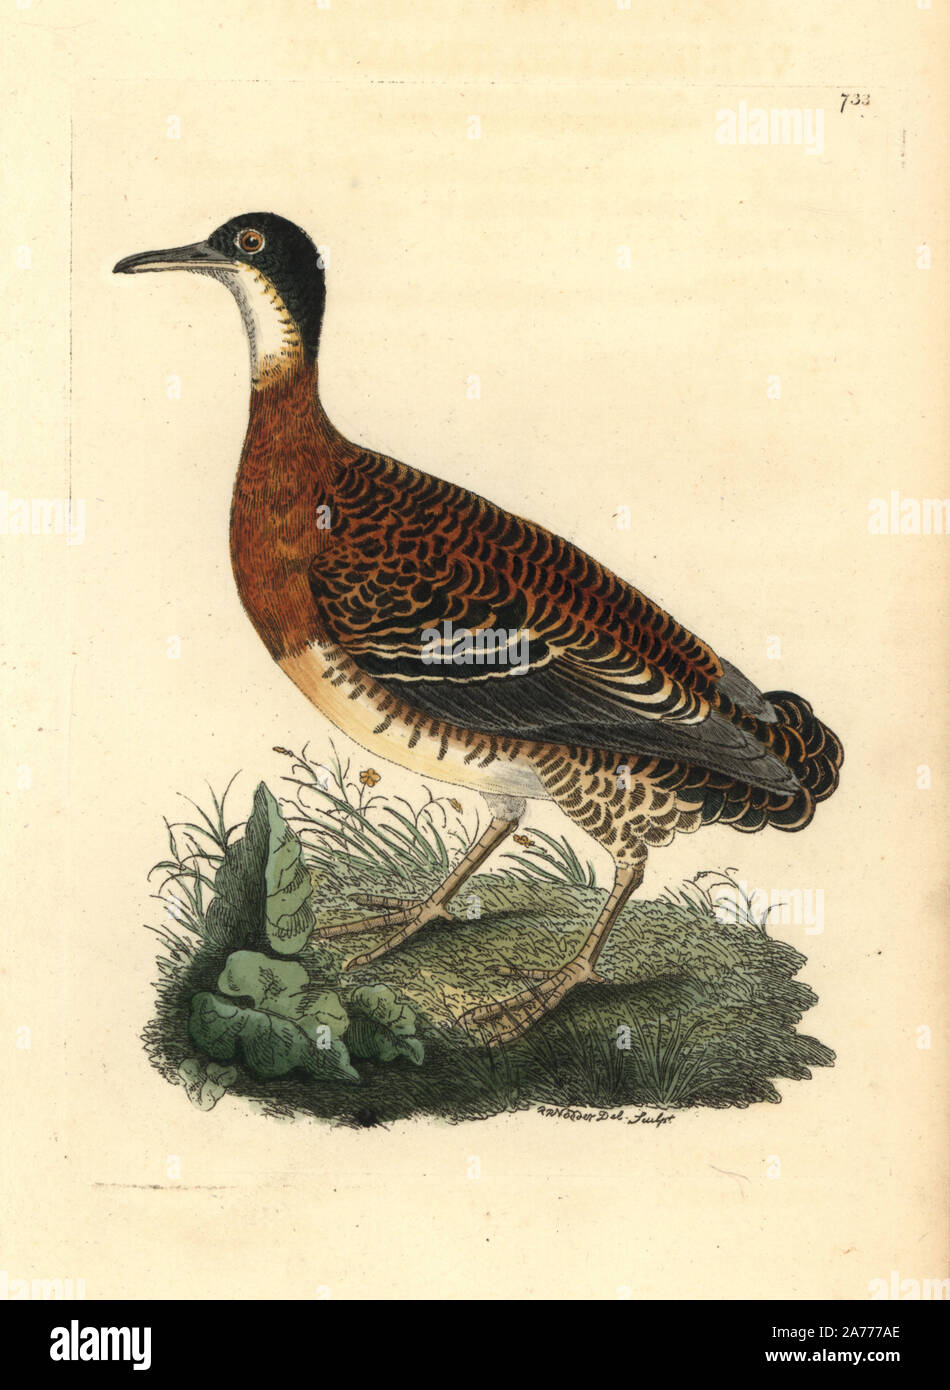 Variegated tinamou, Crypturellus variegatus. Illustration drawn and engraved by Richard Polydore Nodder. Handcoloured copperplate engraving from George Shaw and Frederick Nodder's 'The Naturalist's Miscellany,' London, 1805. Stock Photo